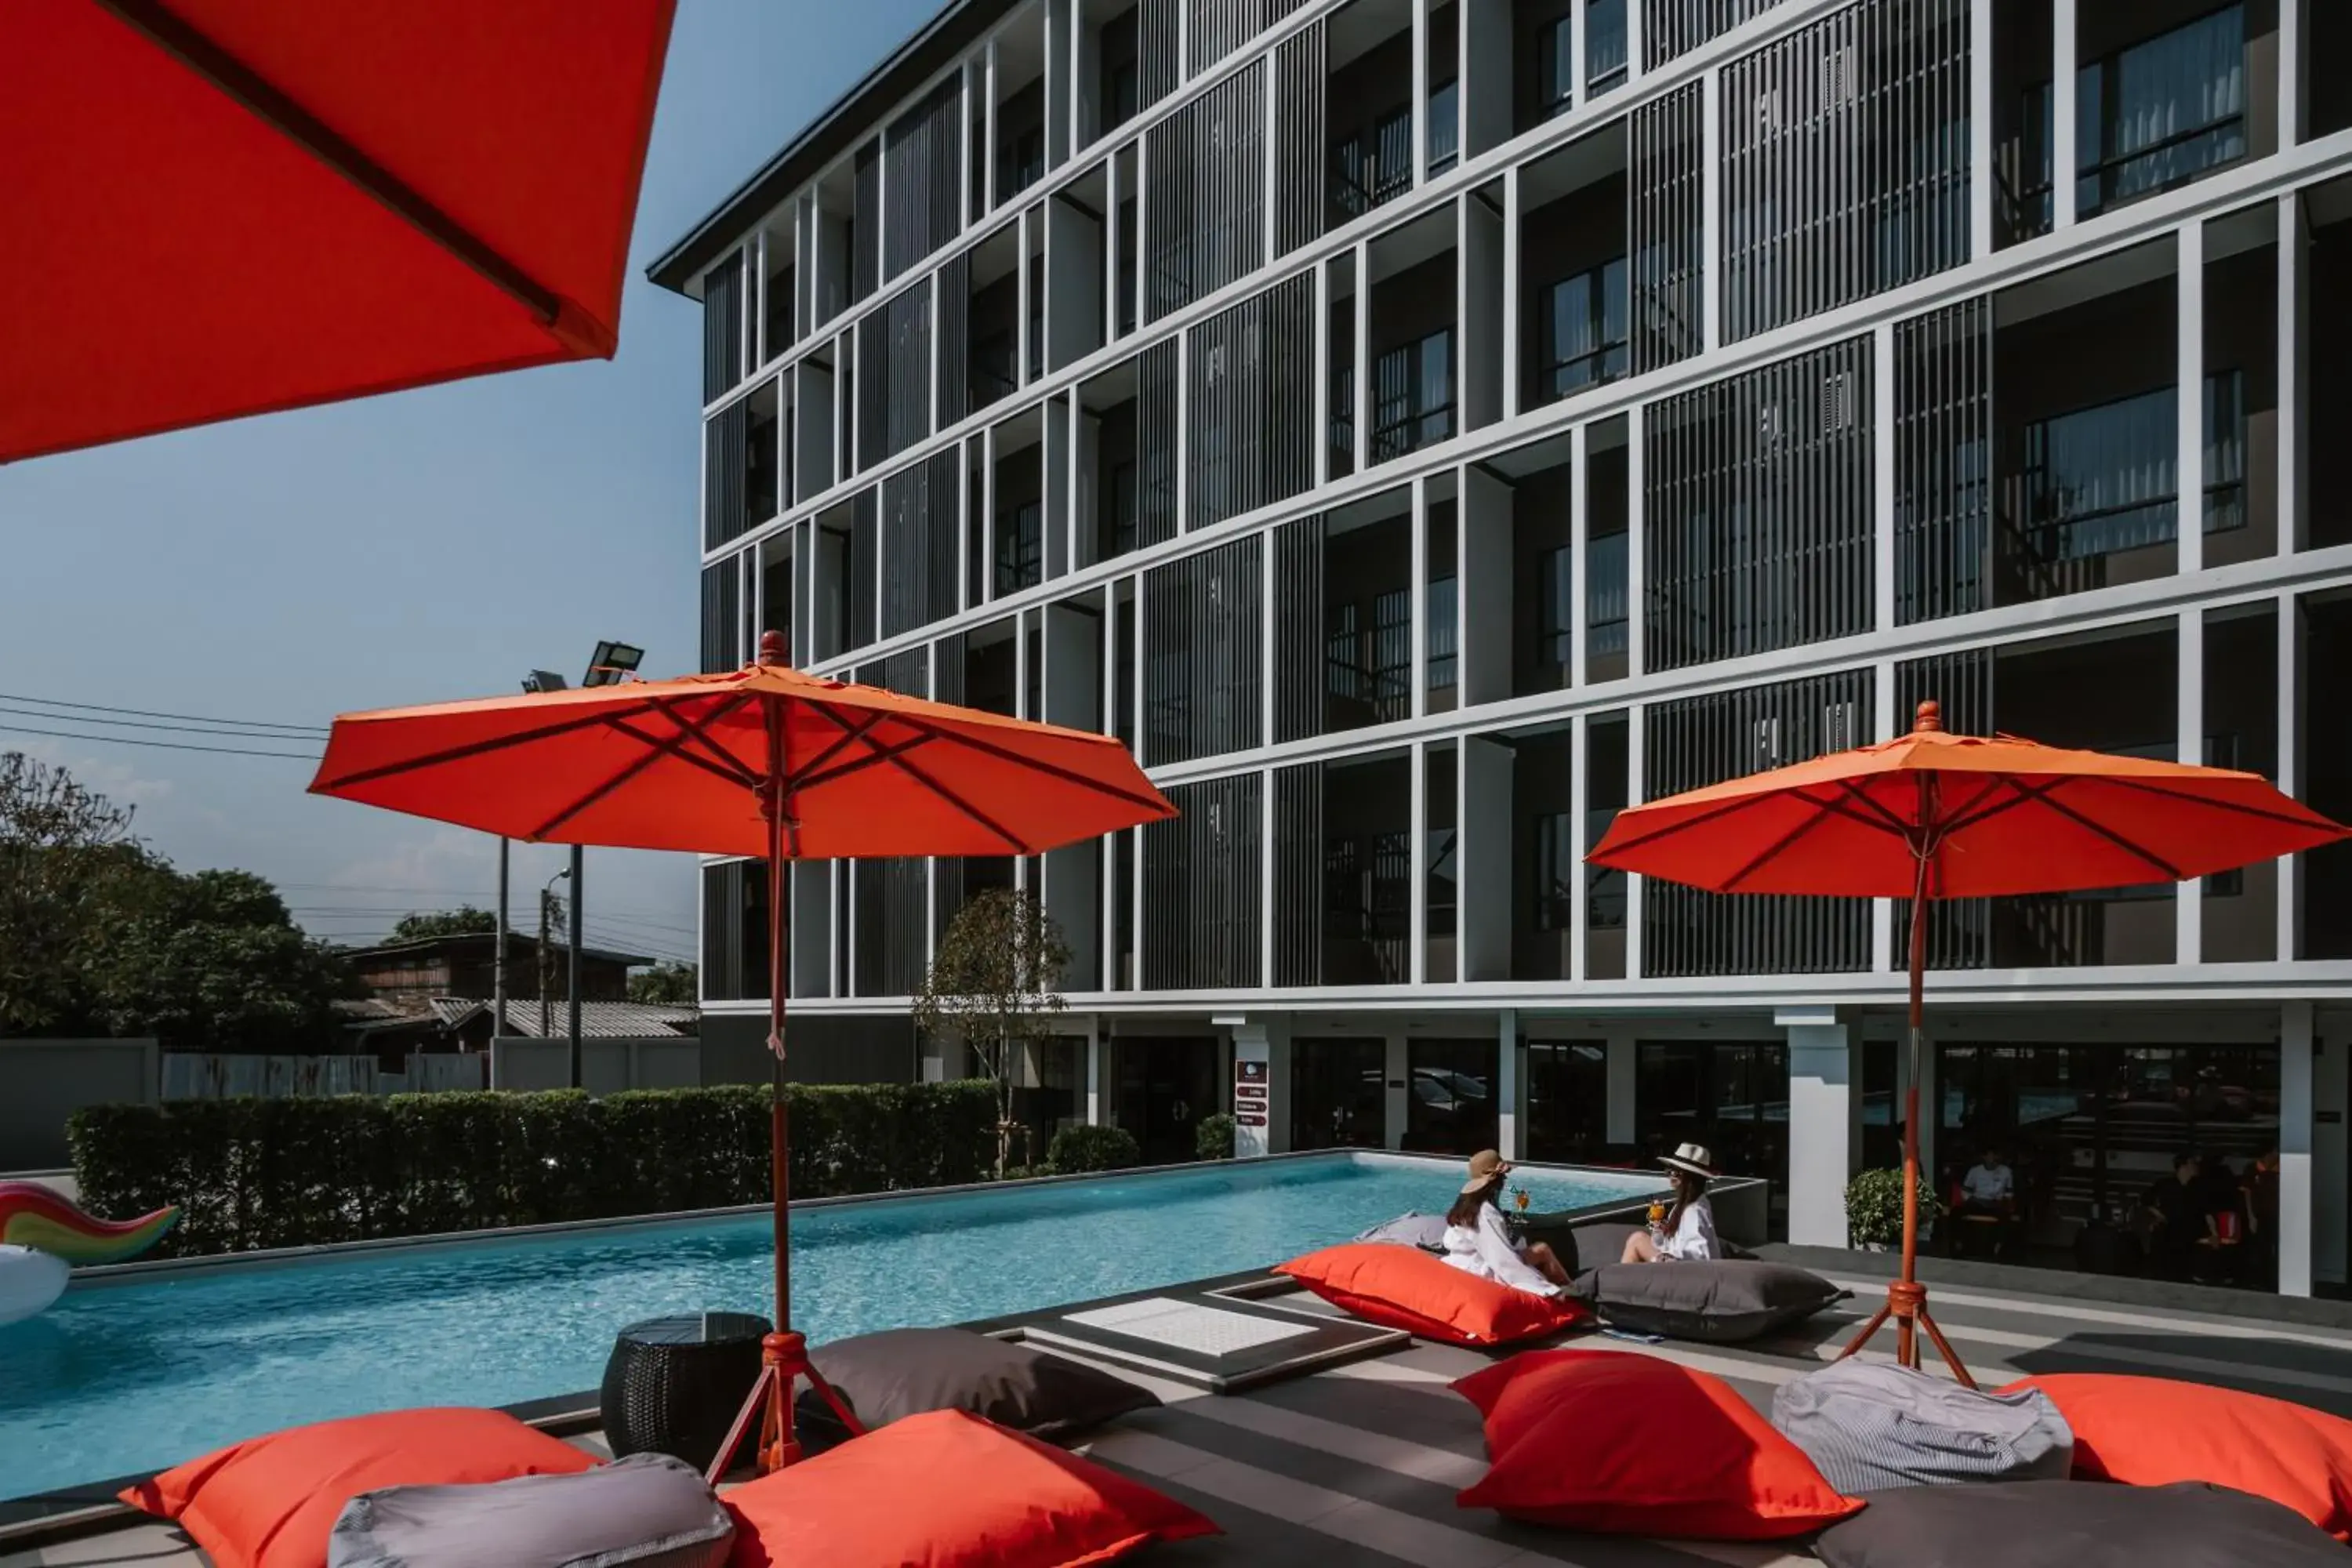 Property building, Swimming Pool in The Iconic Hotel Don Mueang Airport